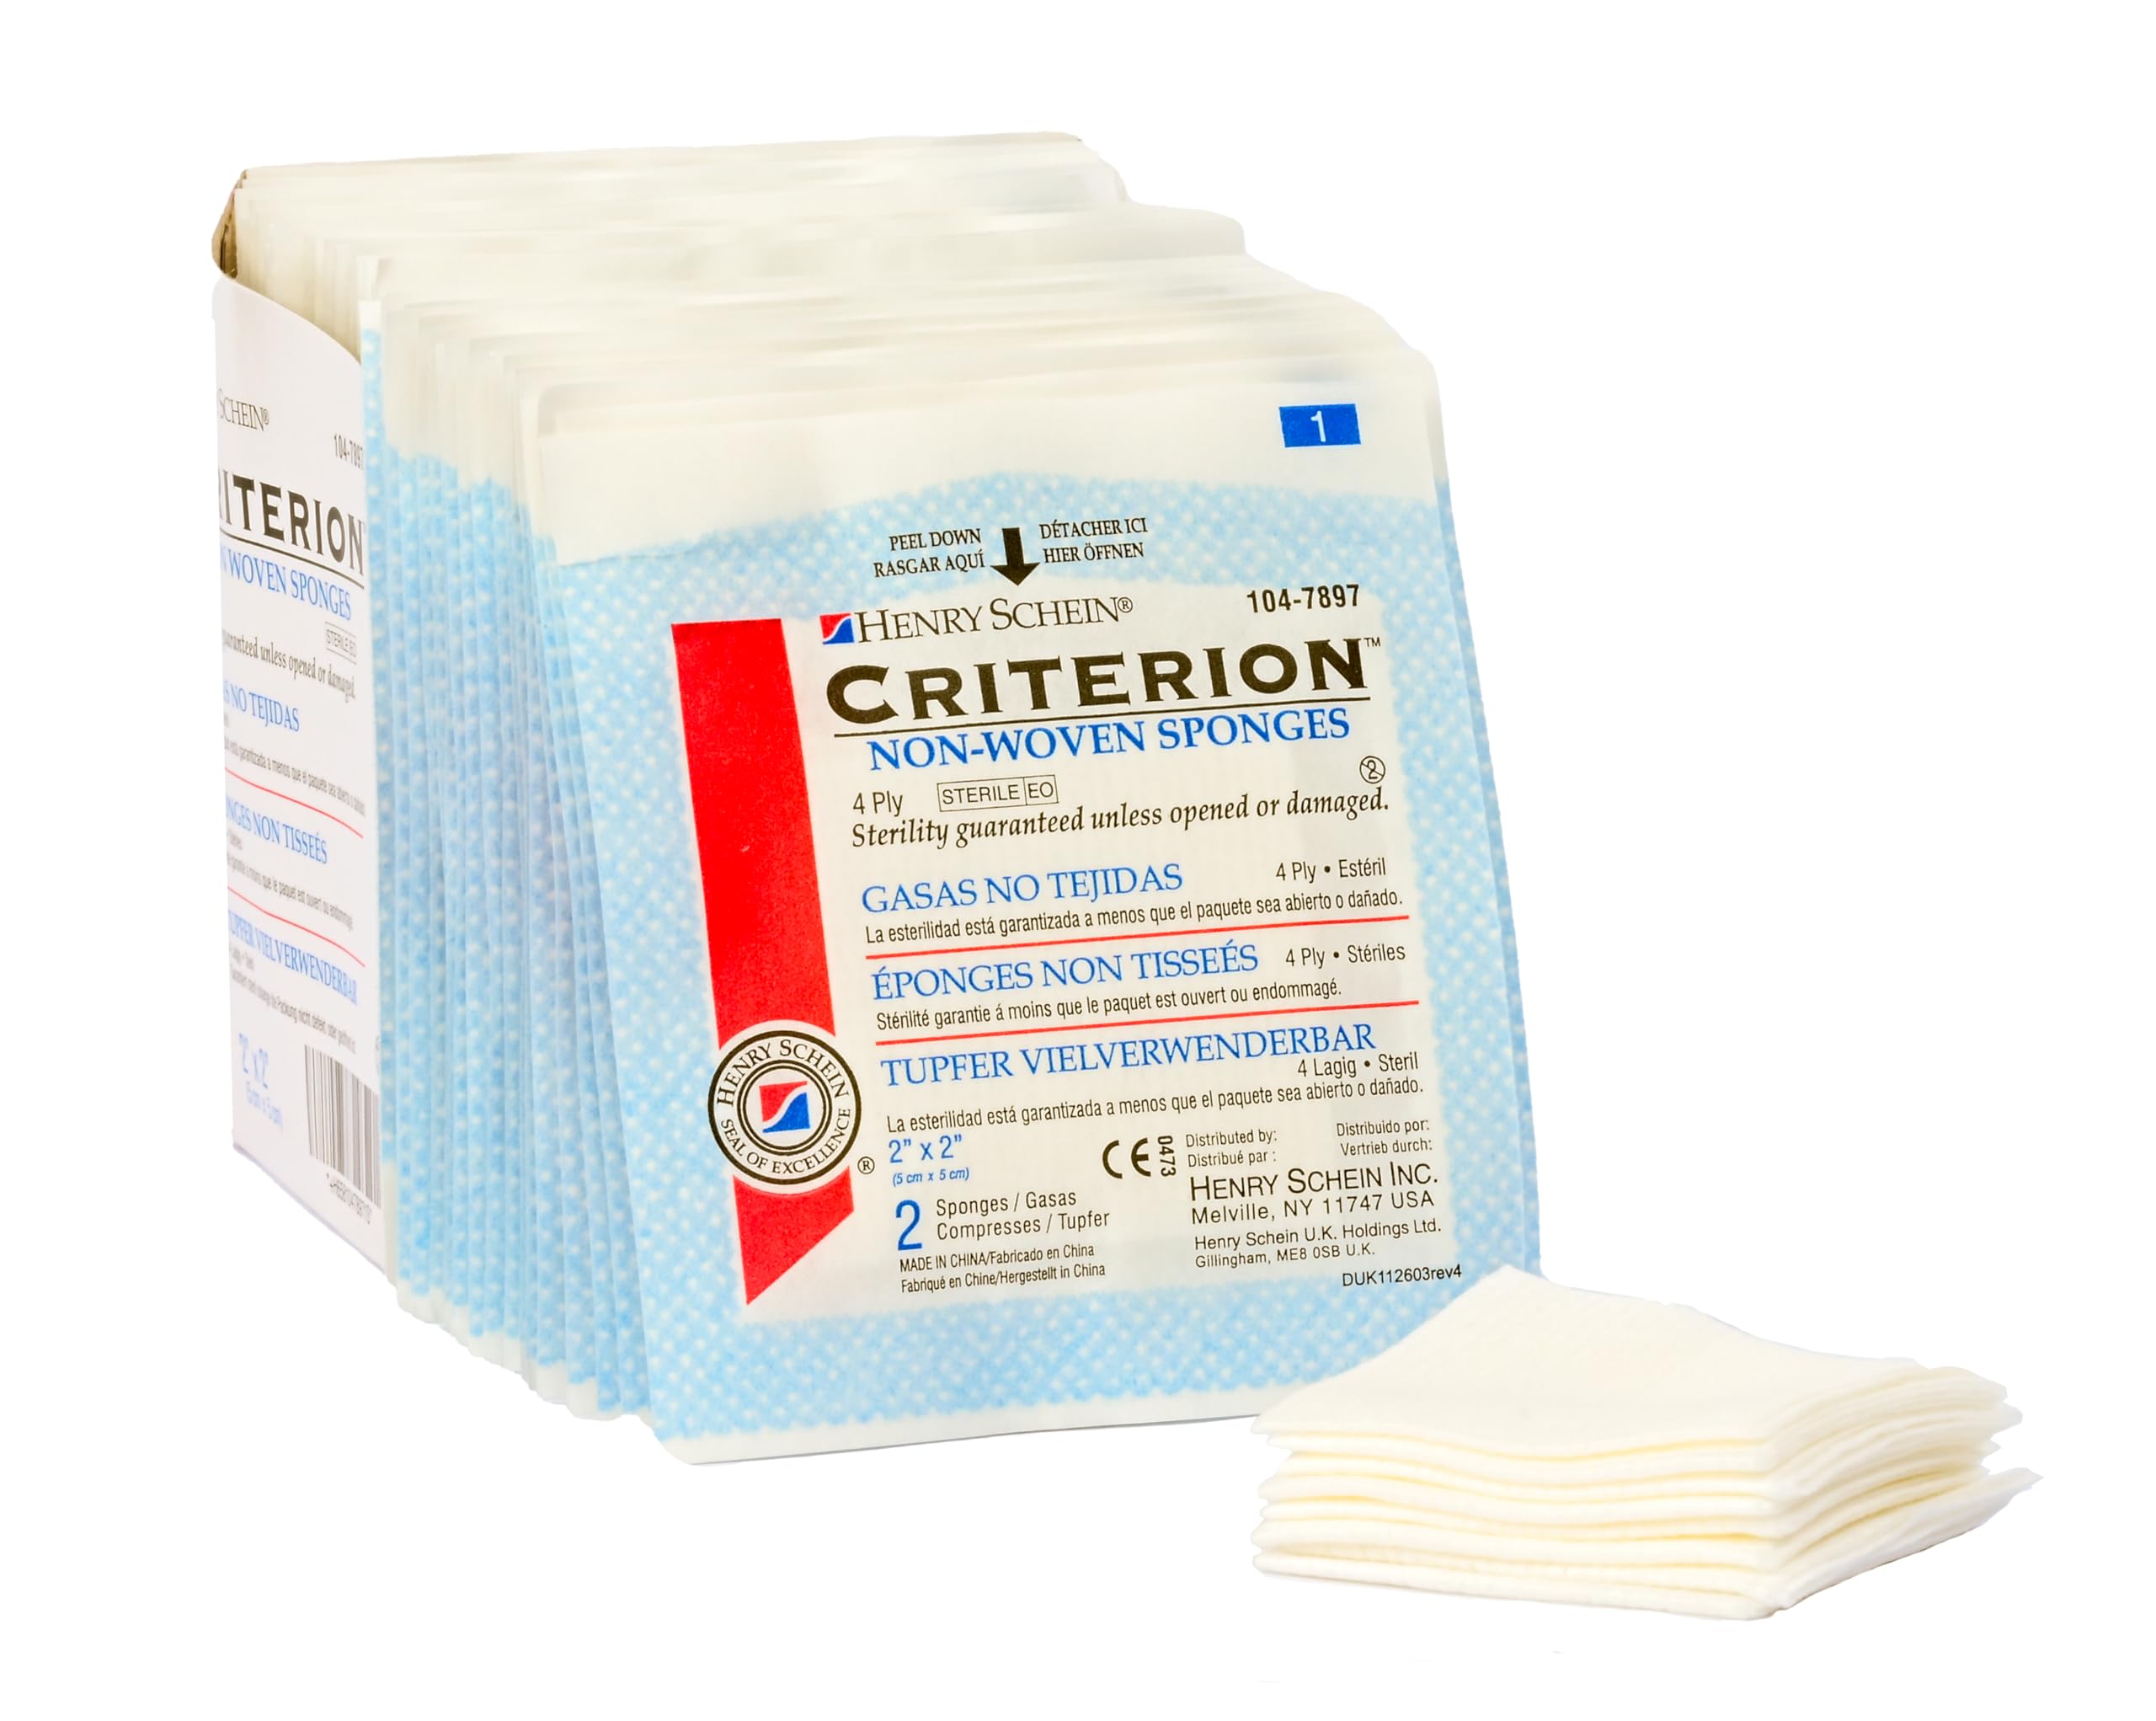 Henry Schein Criterion 3x3” Non-Woven Sponge- Rayon/Polyester Blend, 4-Ply, Sterile- 50/Pack